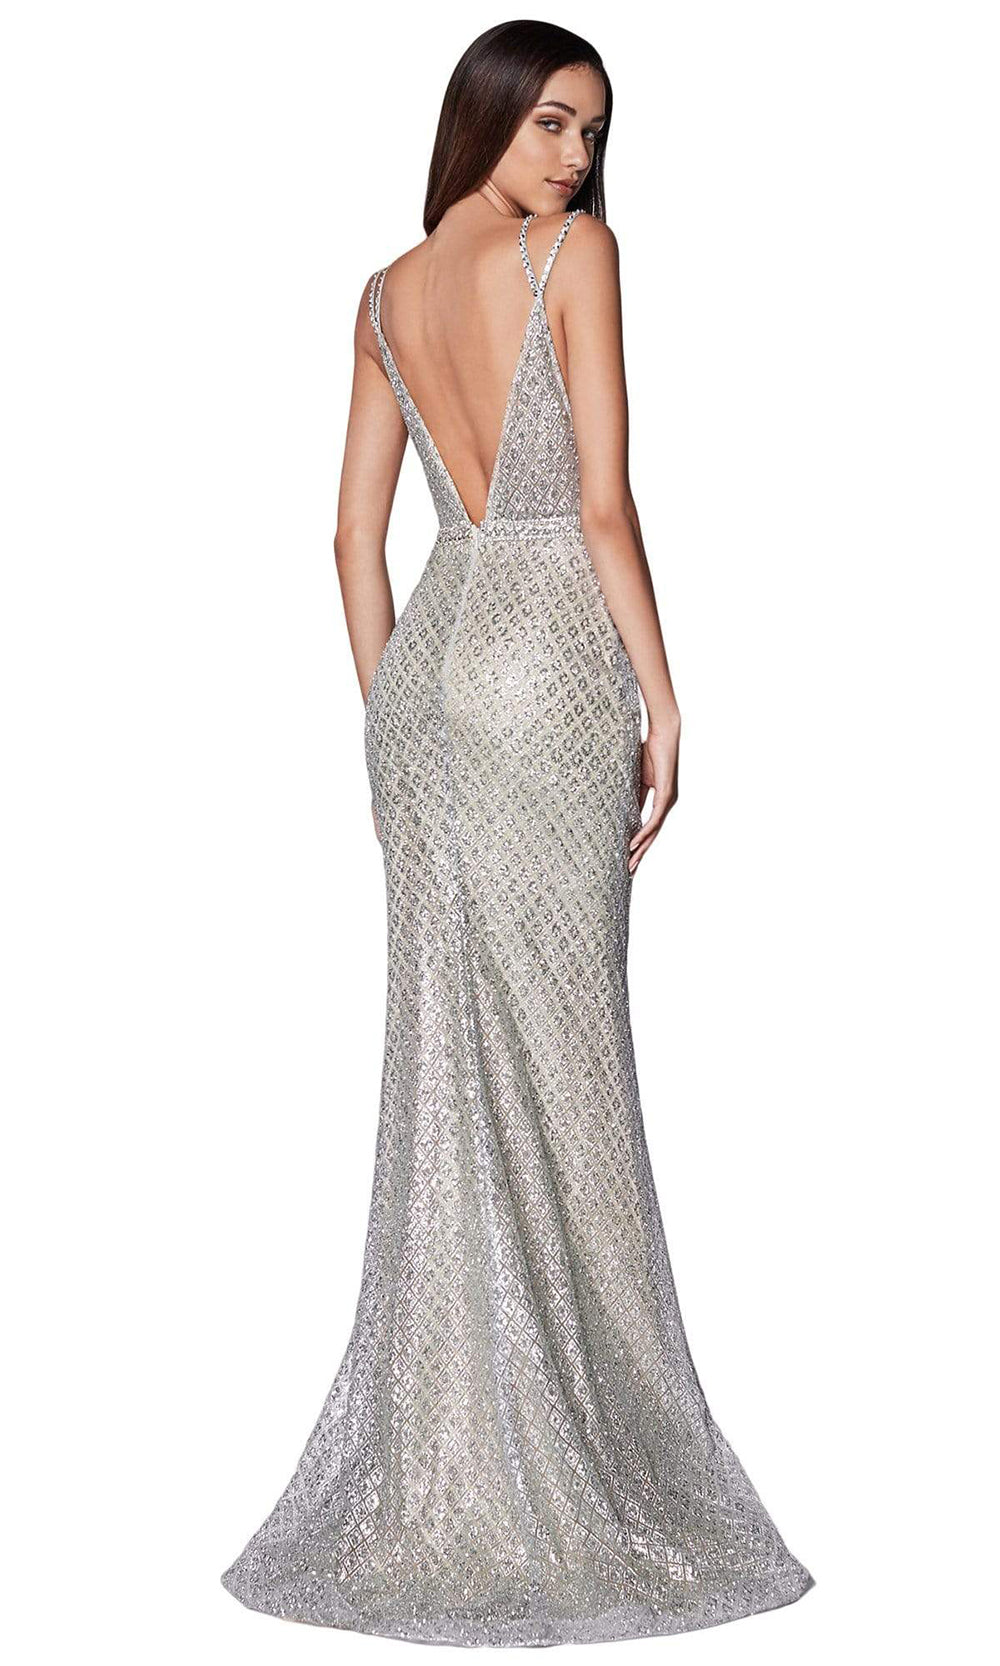 Cinderella Divine - Glitter Print Plunging V-Neck Gown U102 - 1 pc Rose Gold In Size 6 Available CCSALE 18 / Silver-Nude